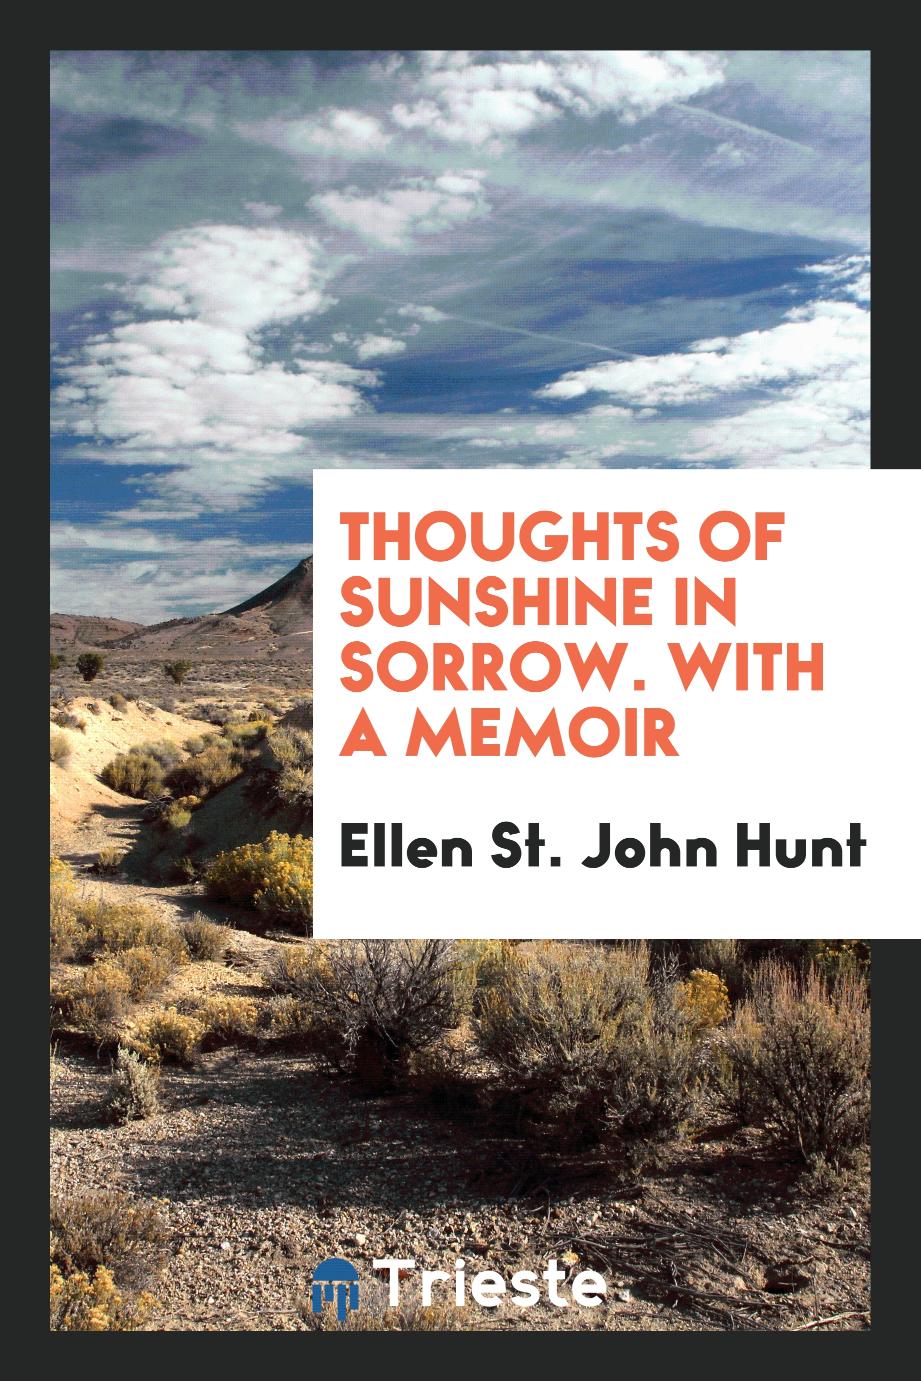 Thoughts of Sunshine in Sorrow. With a Memoir